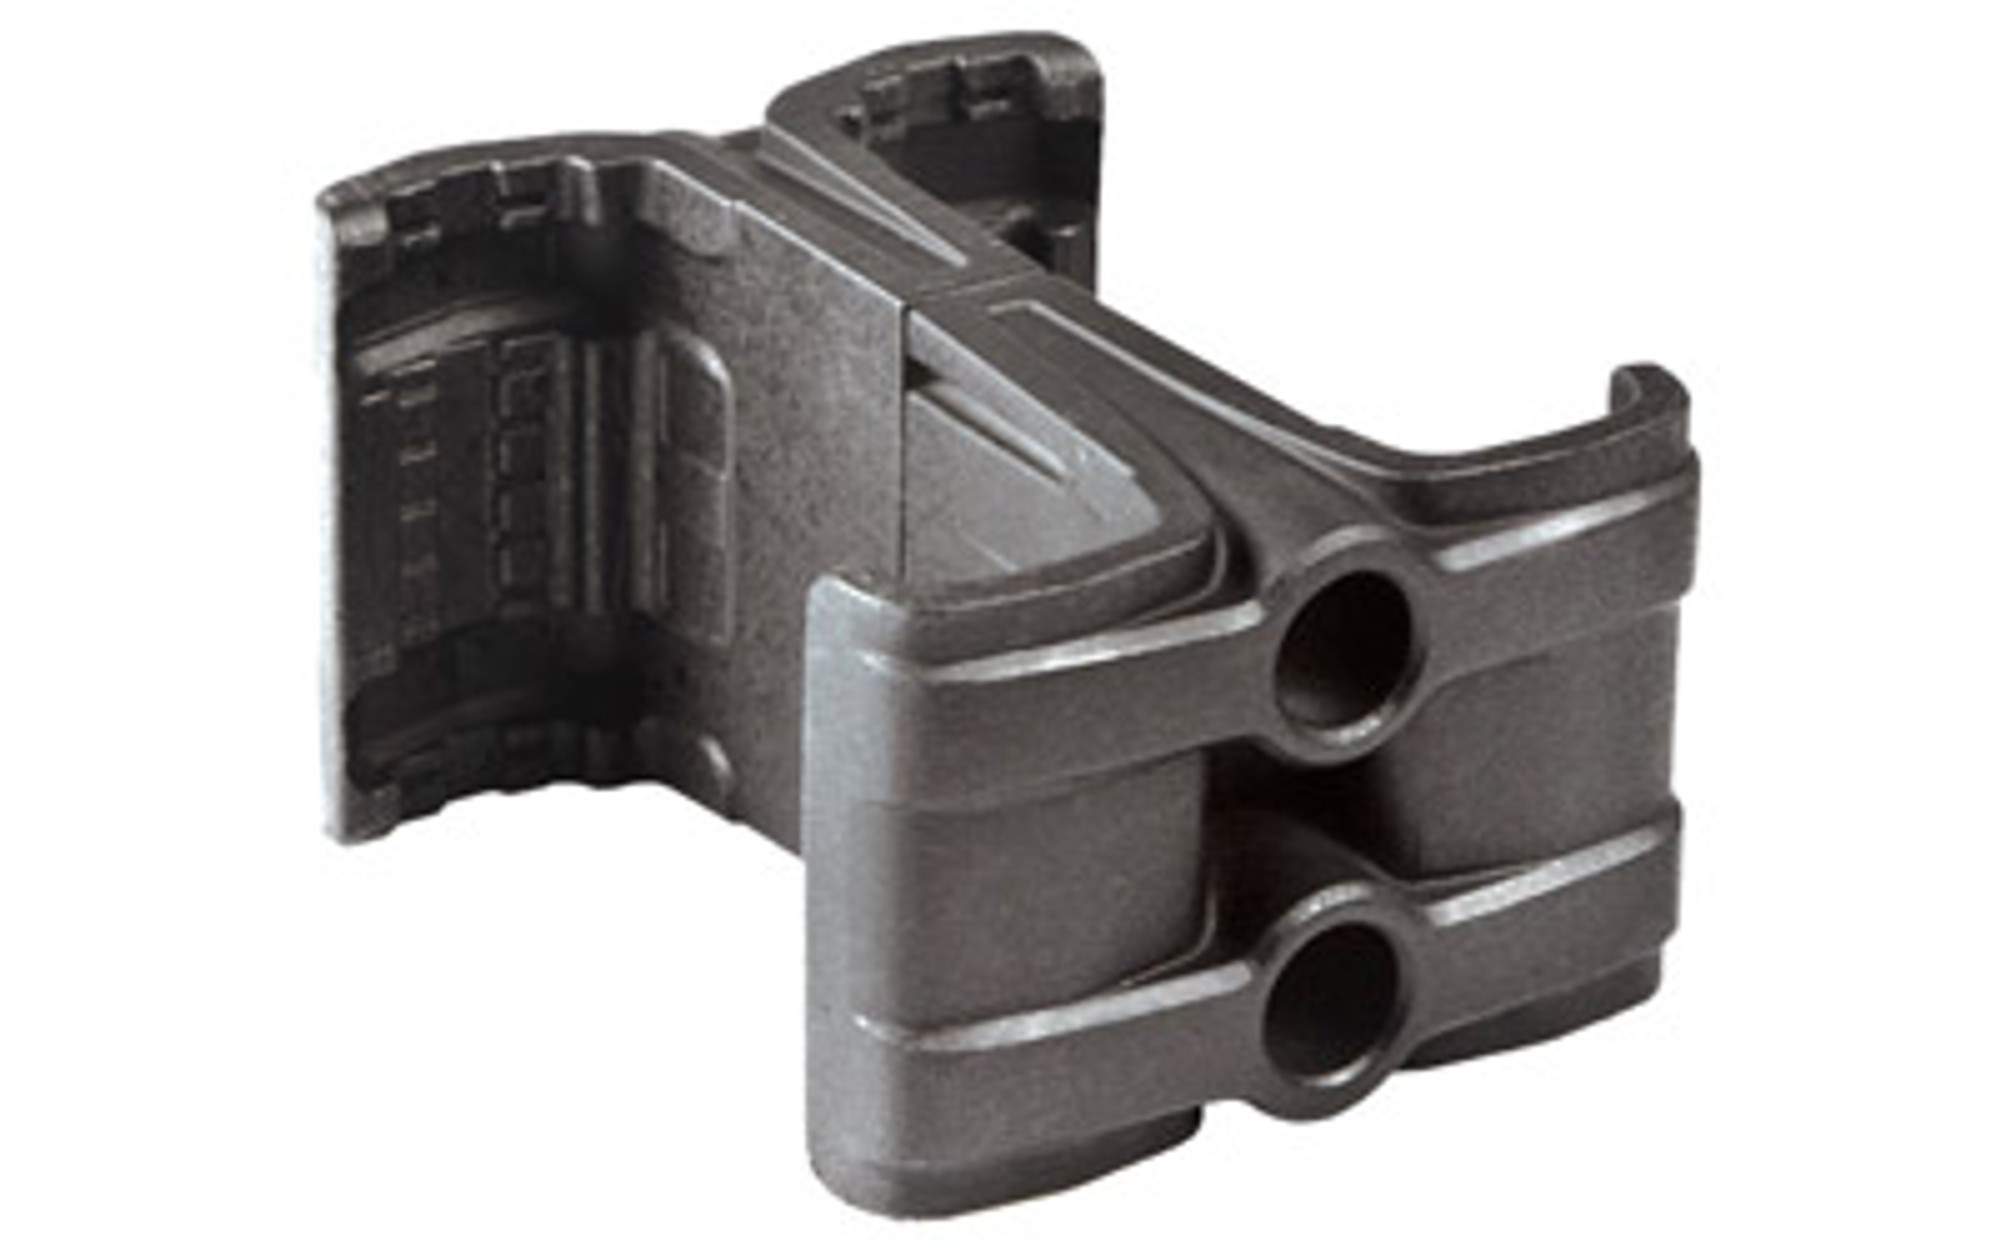 Magpul PTS MAGLINK PMAG Airsoft Magazine Coupler / Mag Clamp - Black